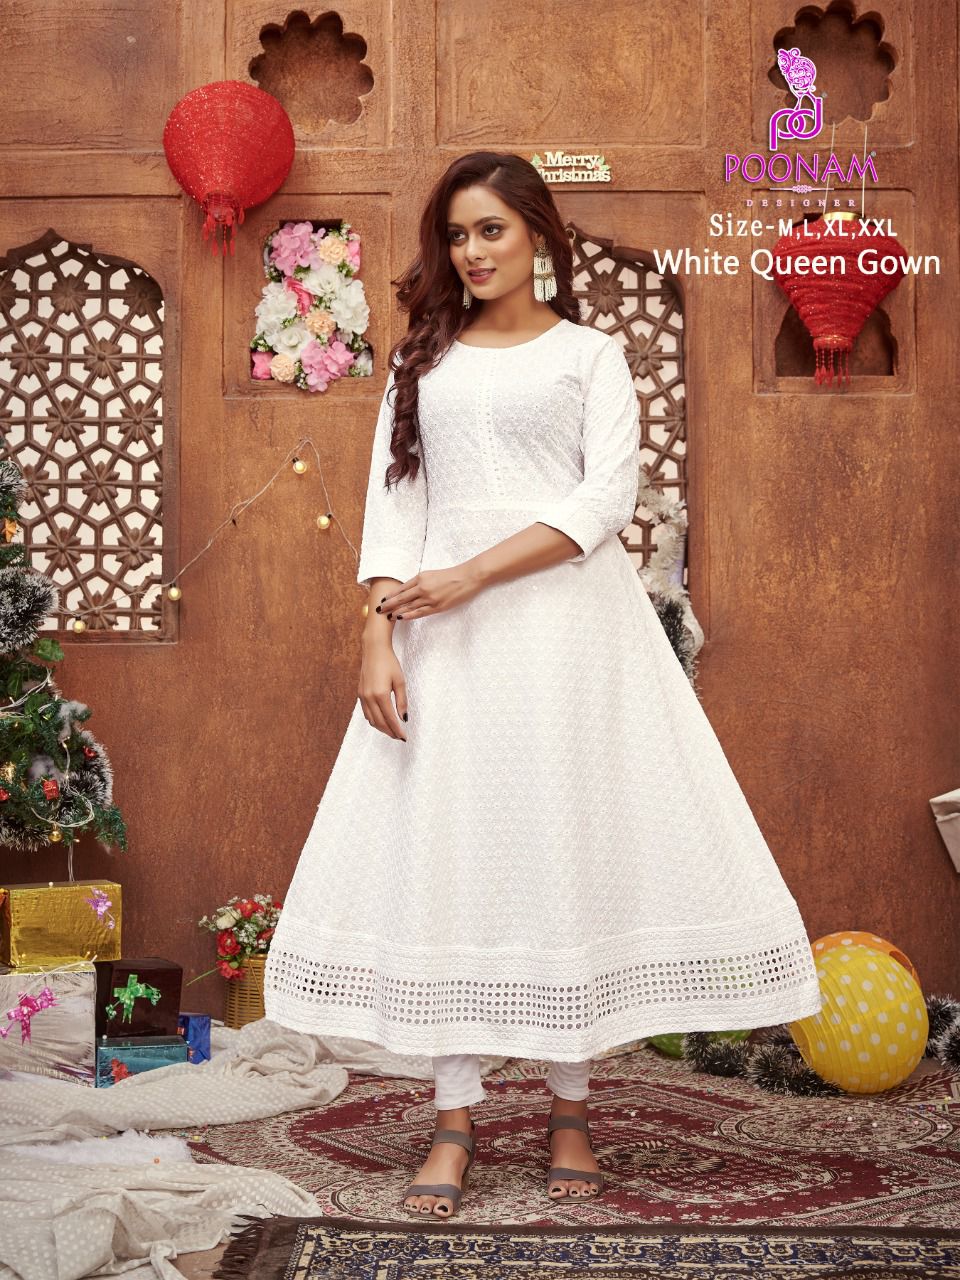 poonam White Queen collection 2